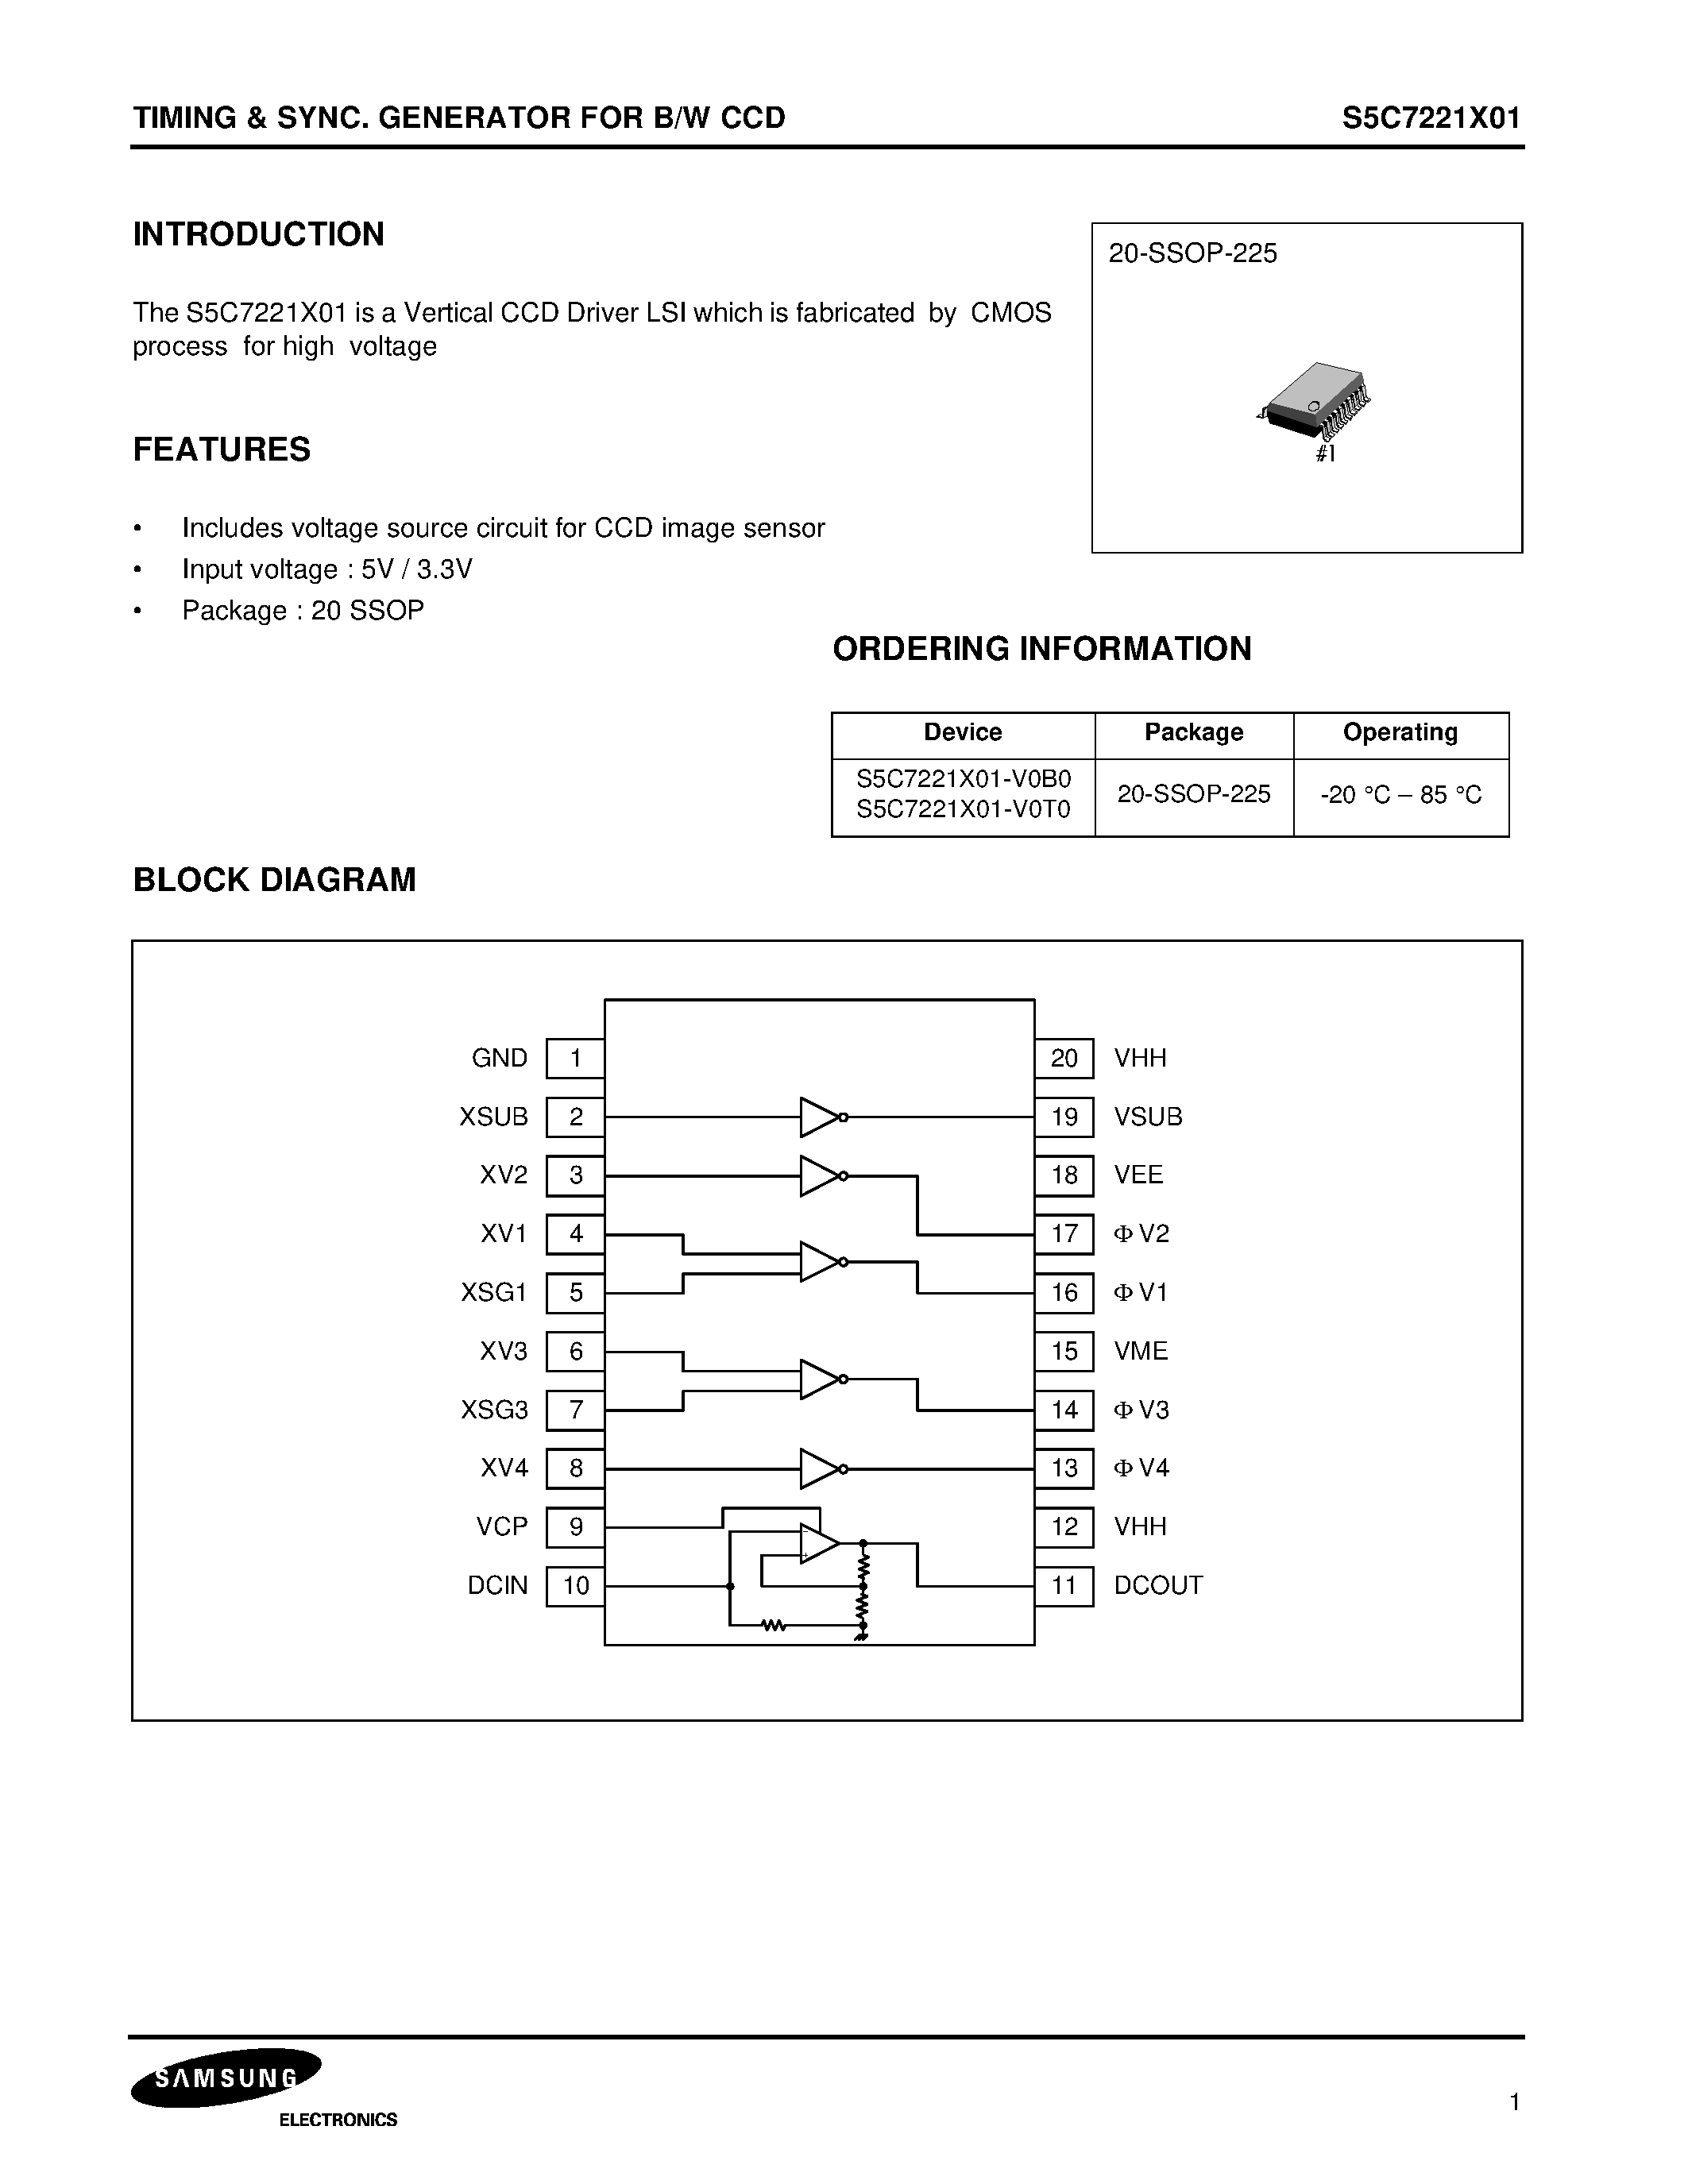 Datasheet S5C7221X01-V0T0 - TIMING & SYNC. GENERATOR FOR B/W CCD page 1